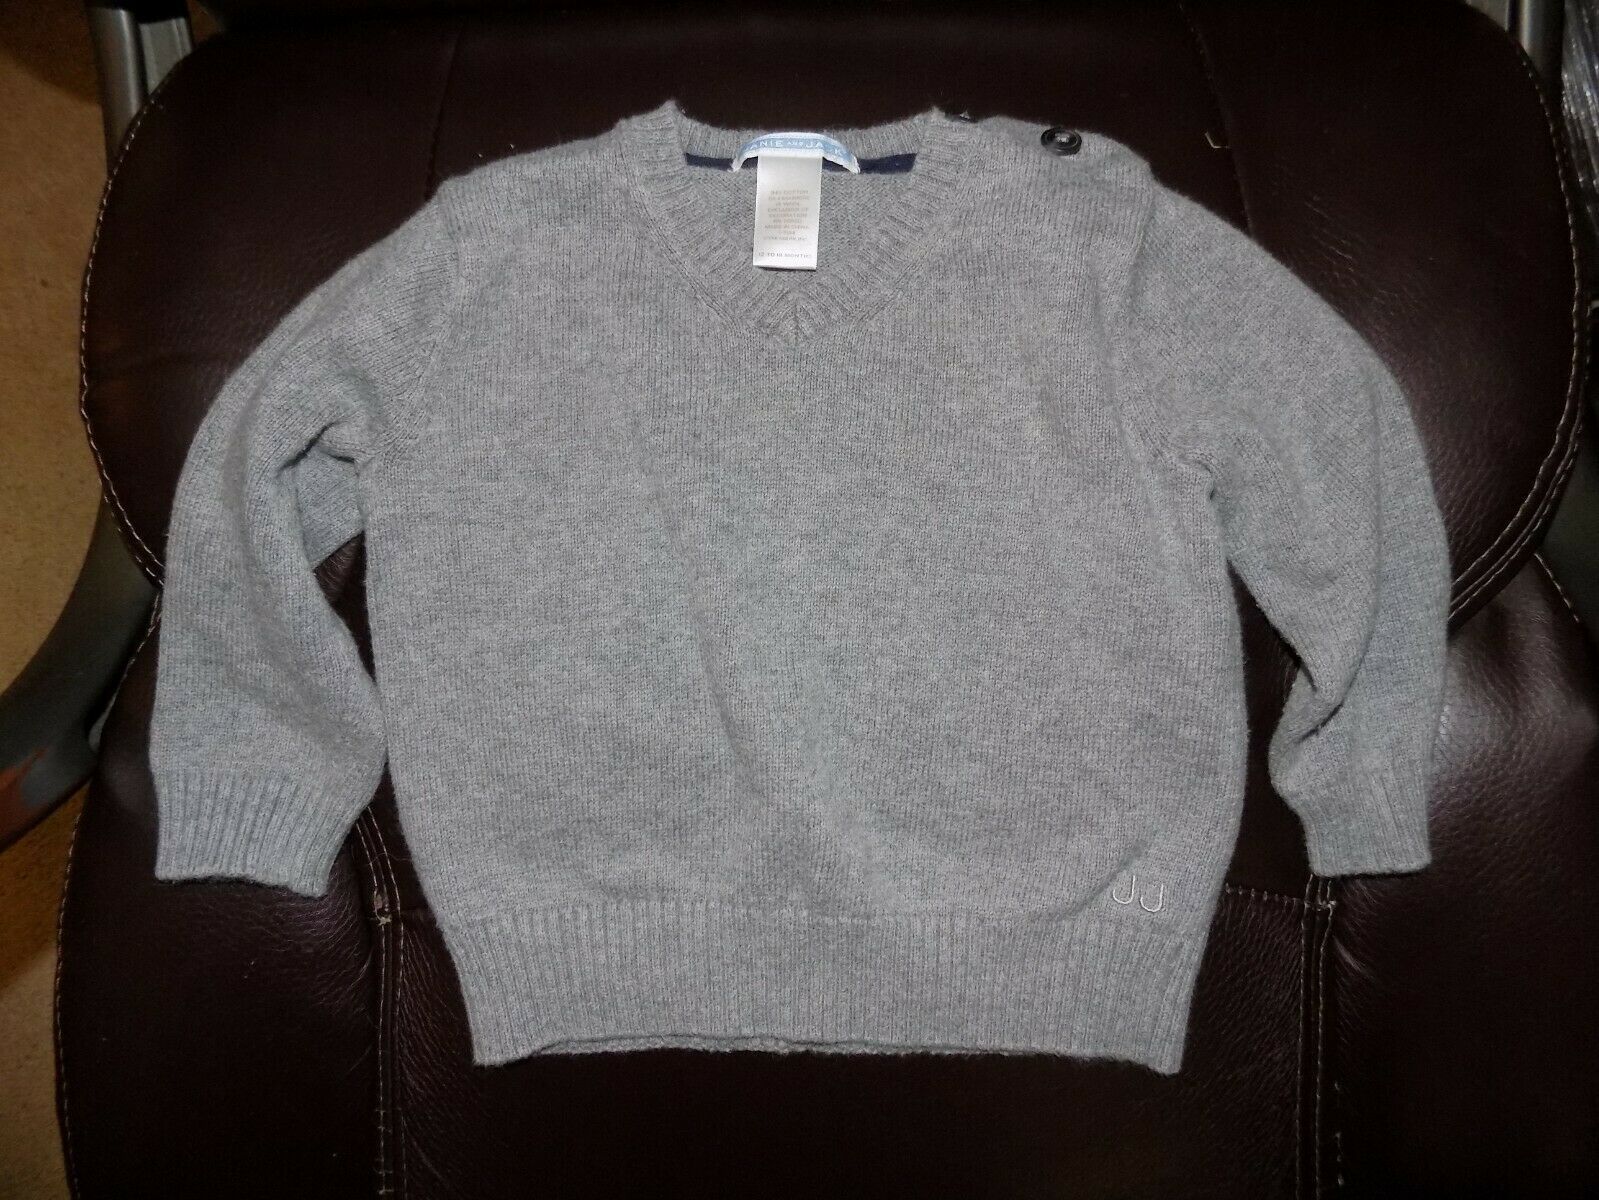 Primary image for Janie and Jack Gray V-Neck Long Sleeve Sweater Size 12/18 Months EUC